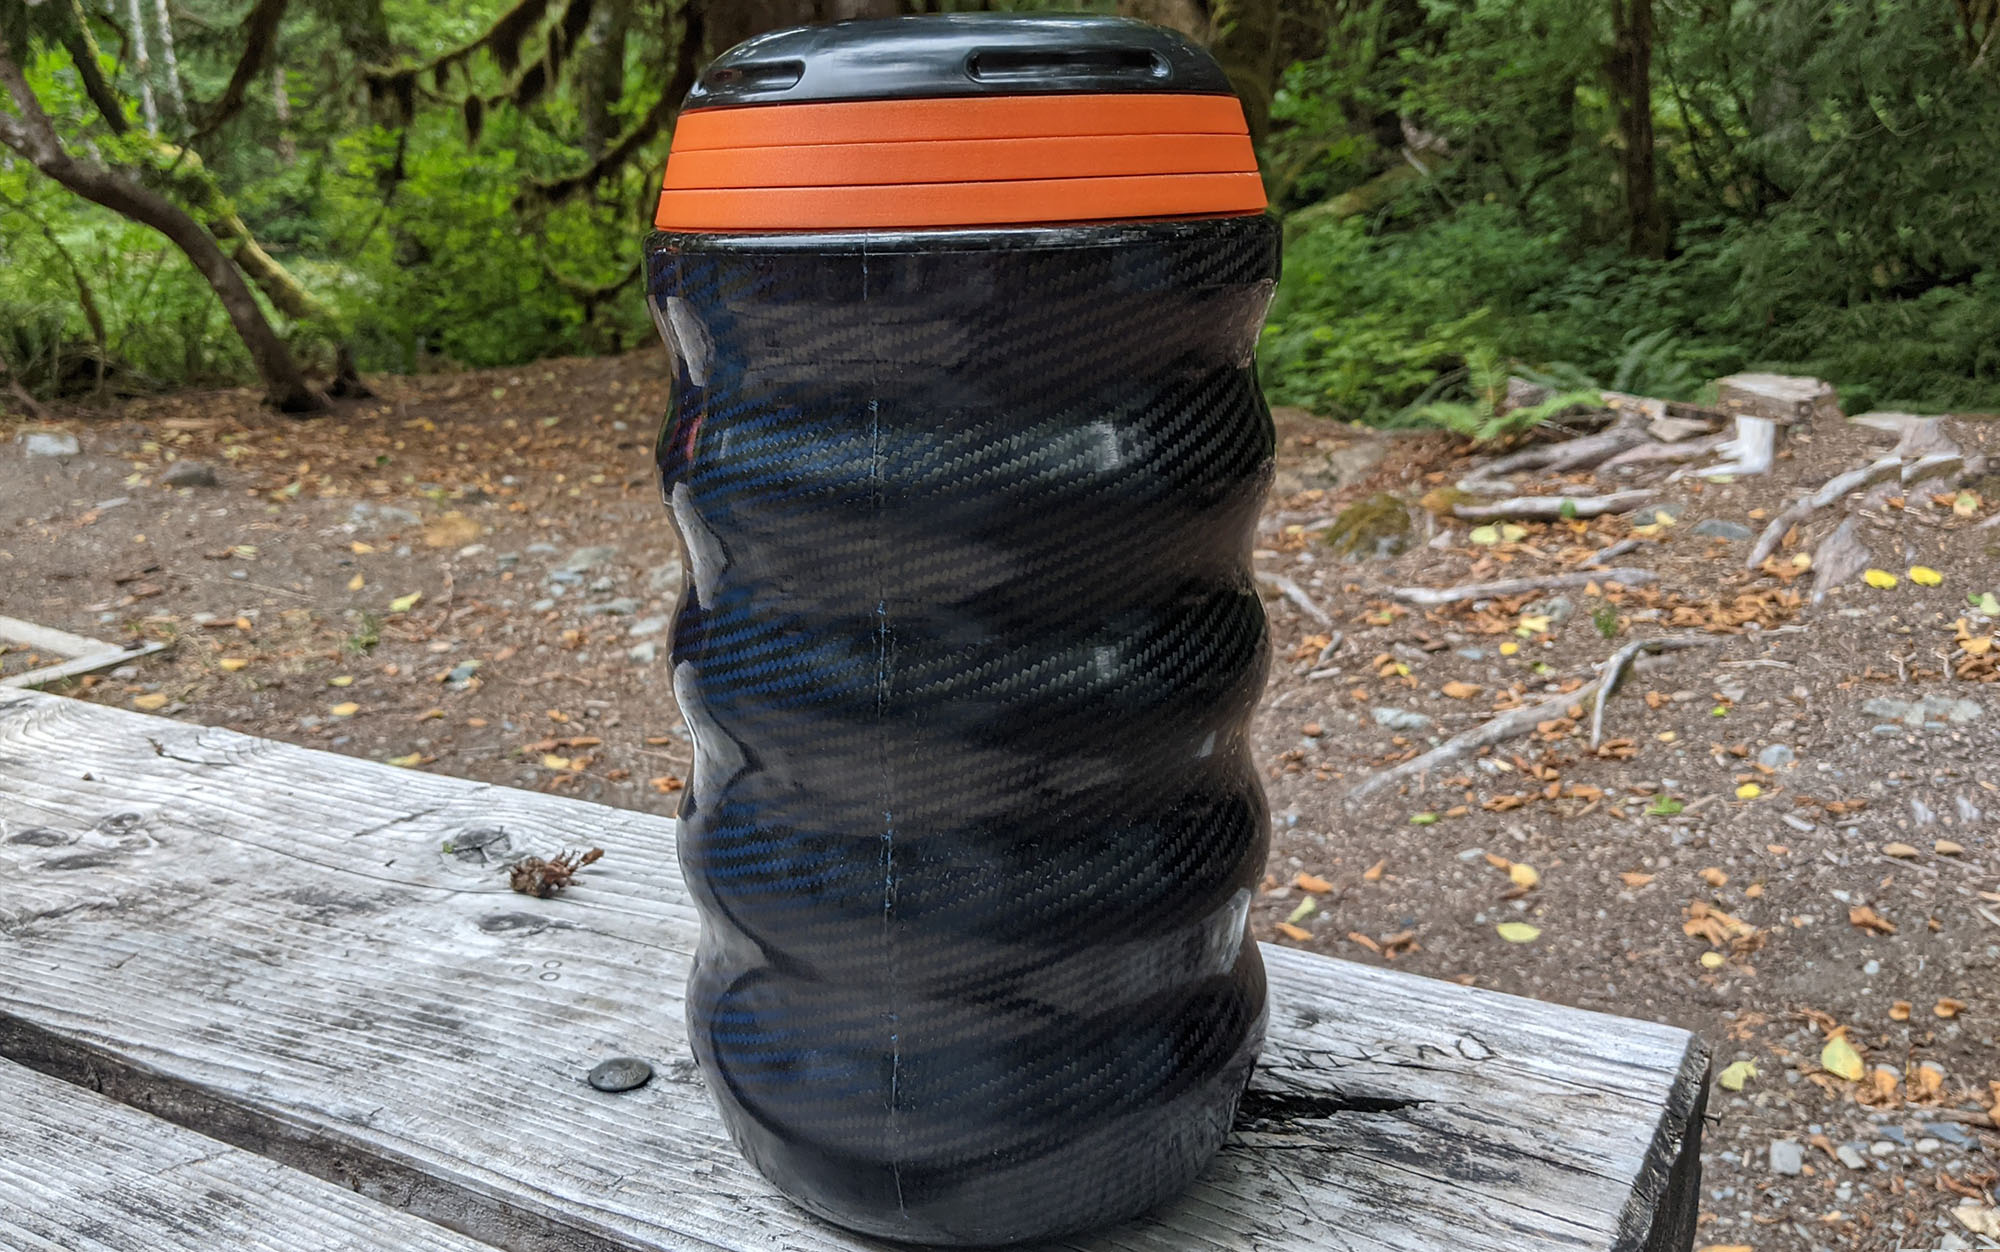 We tested the Grubcan Carbon 6.6.